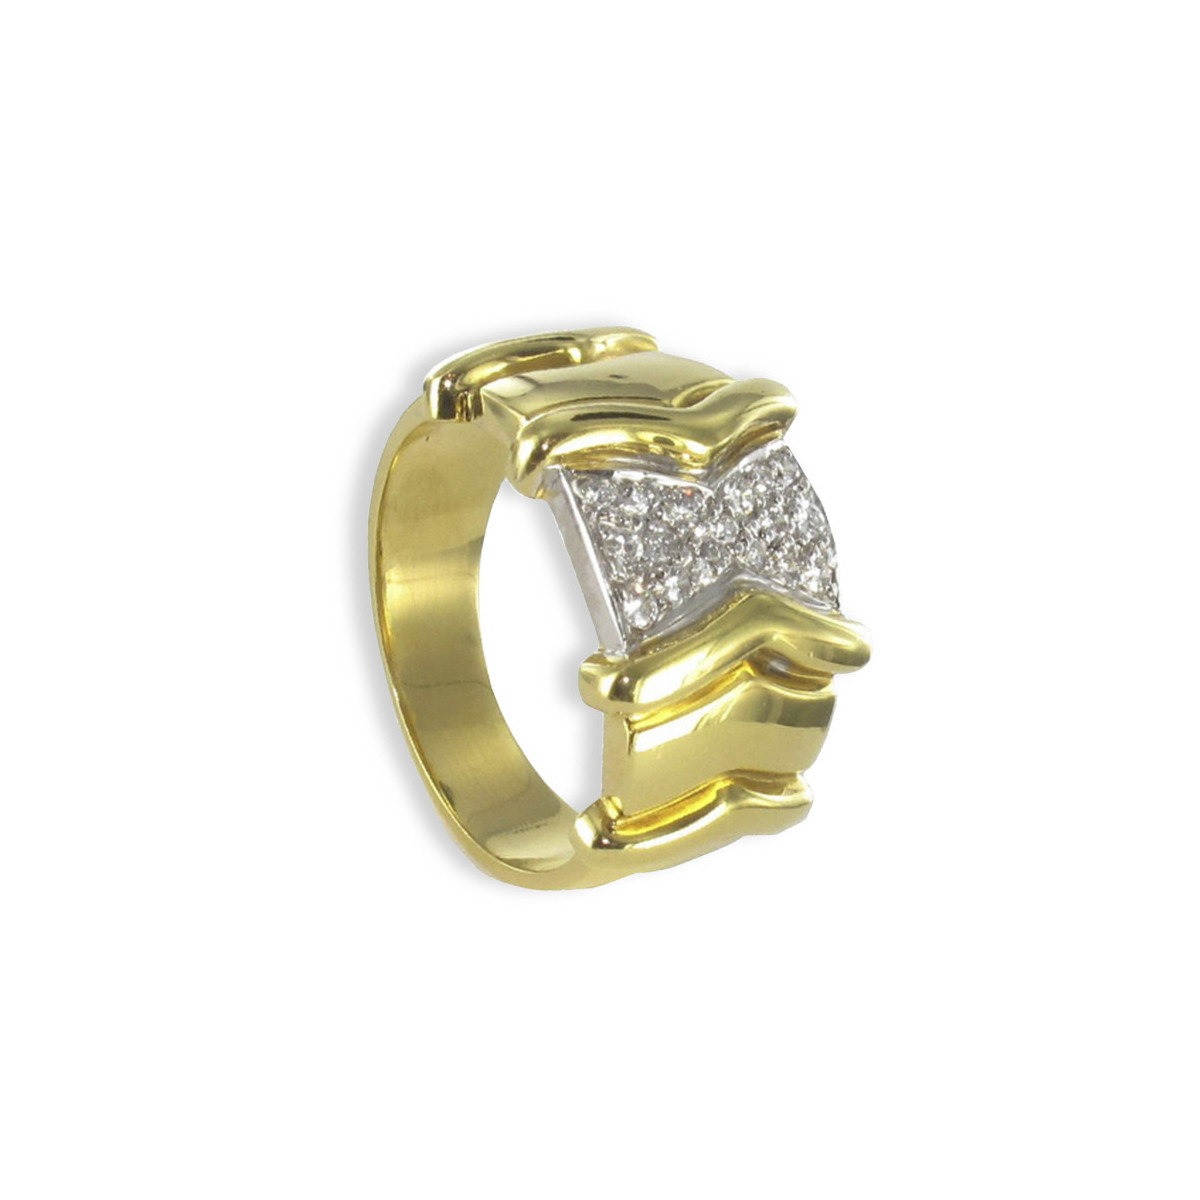 RING 2 GOLD AND SMALL DIAMONDS